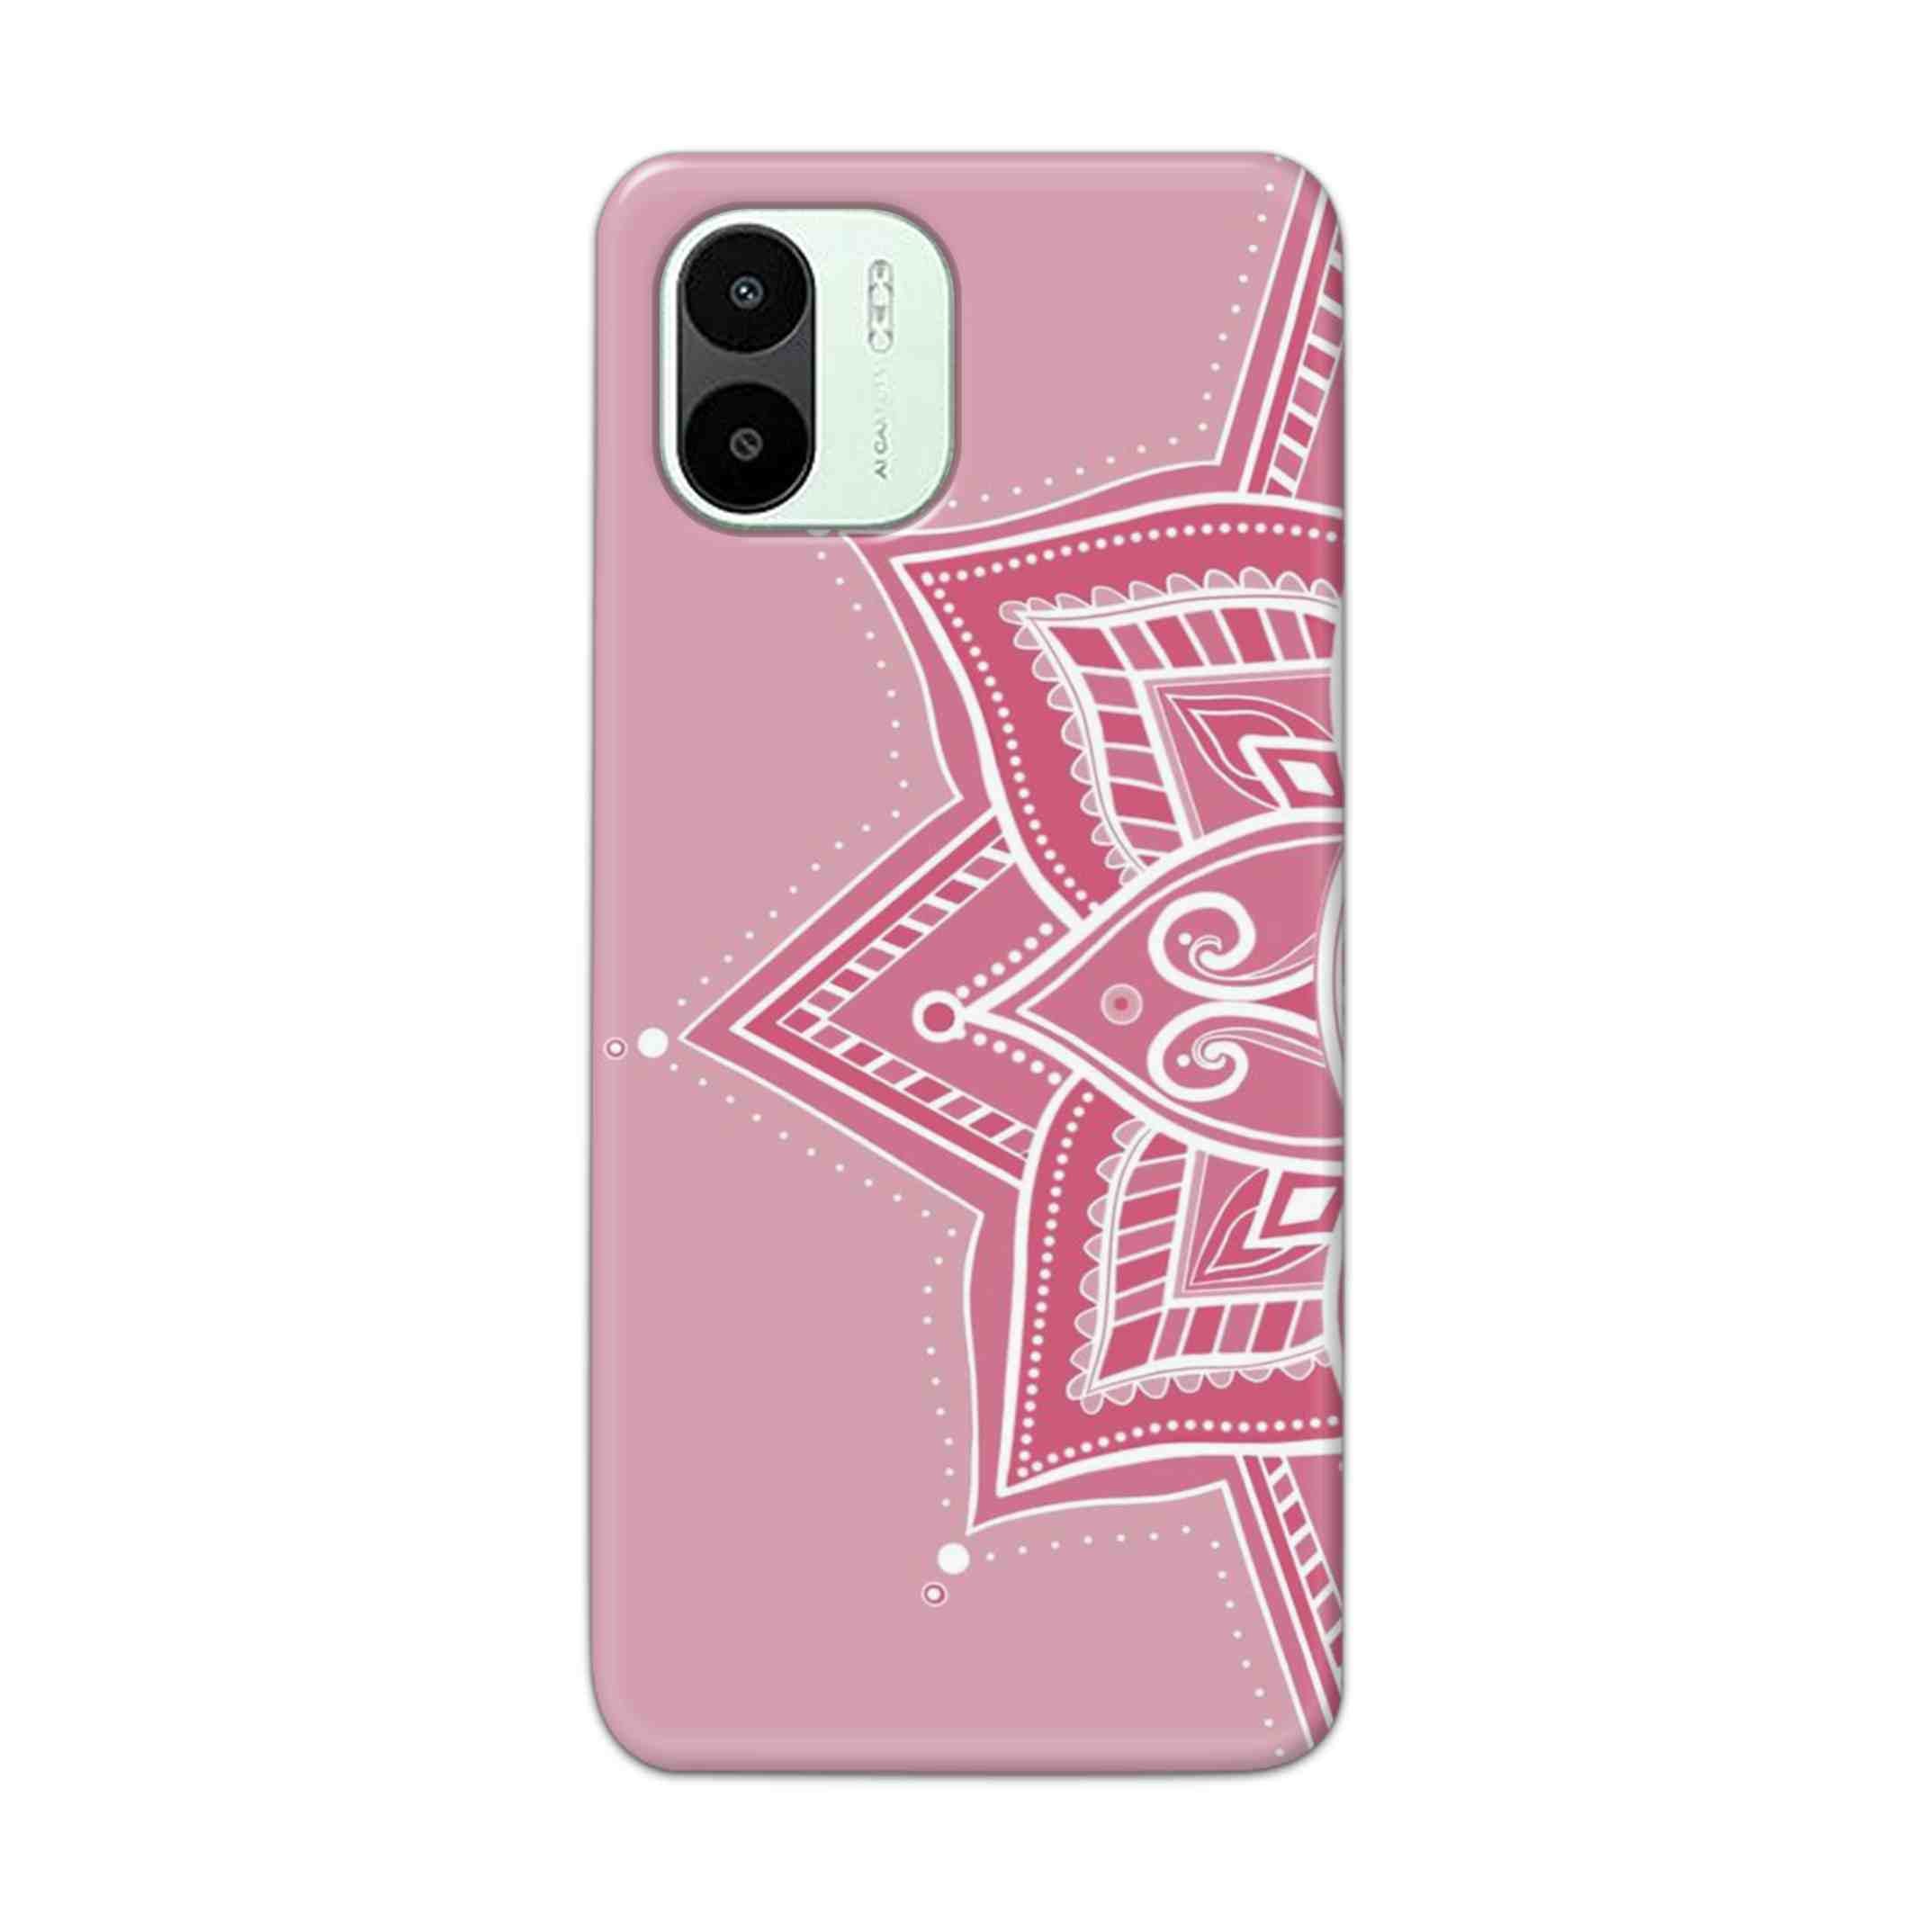 Buy Pink Rangoli Hard Back Mobile Phone Case Cover For Xiaomi Redmi A1 5G Online